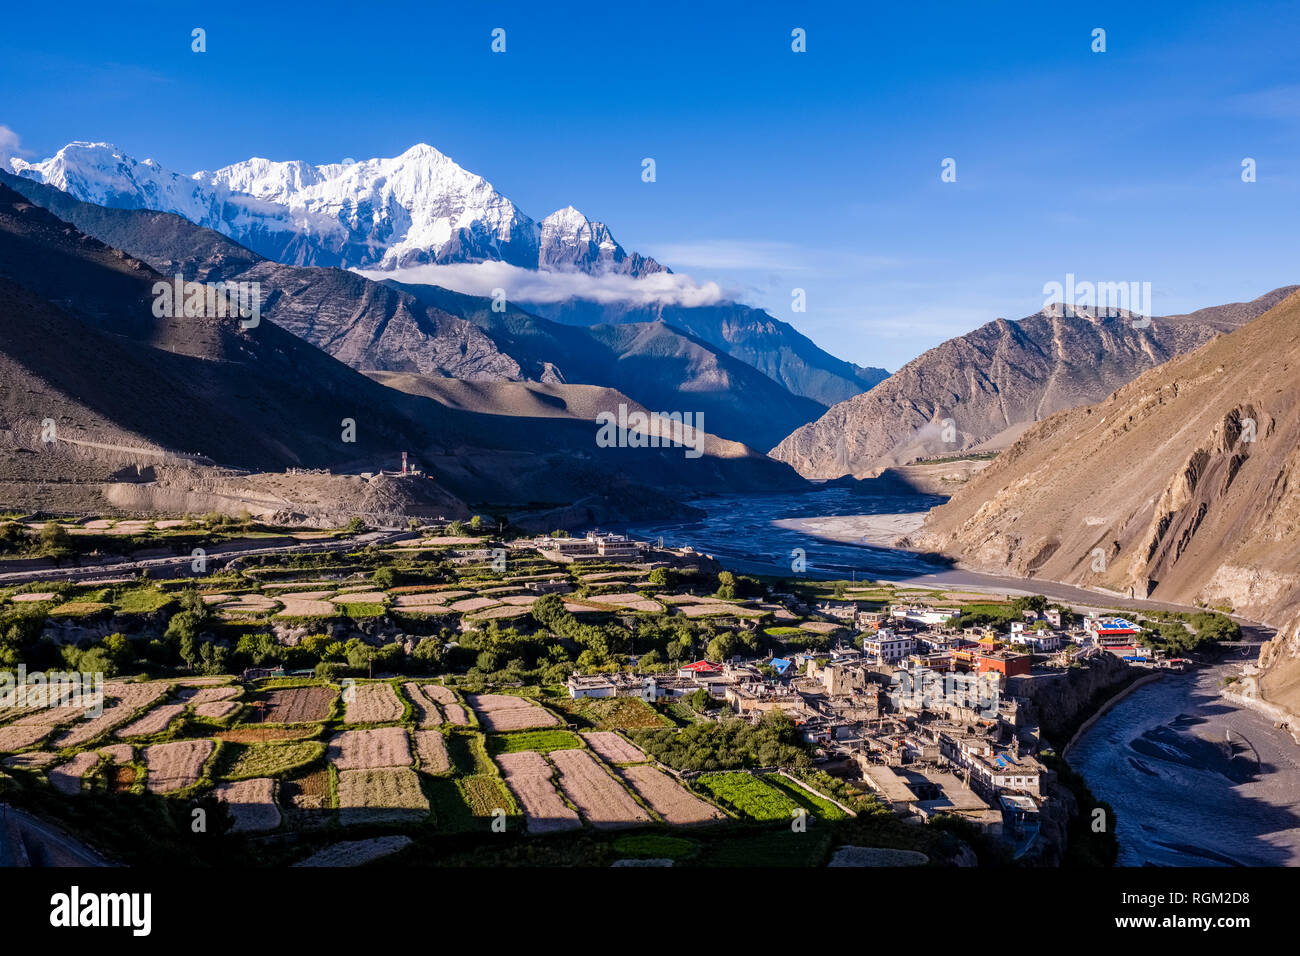 Aerial view on the town and agricultural surroundings in Kali Gandaki valley, the summit of the mountain Nilgiri in the distance Stock Photo